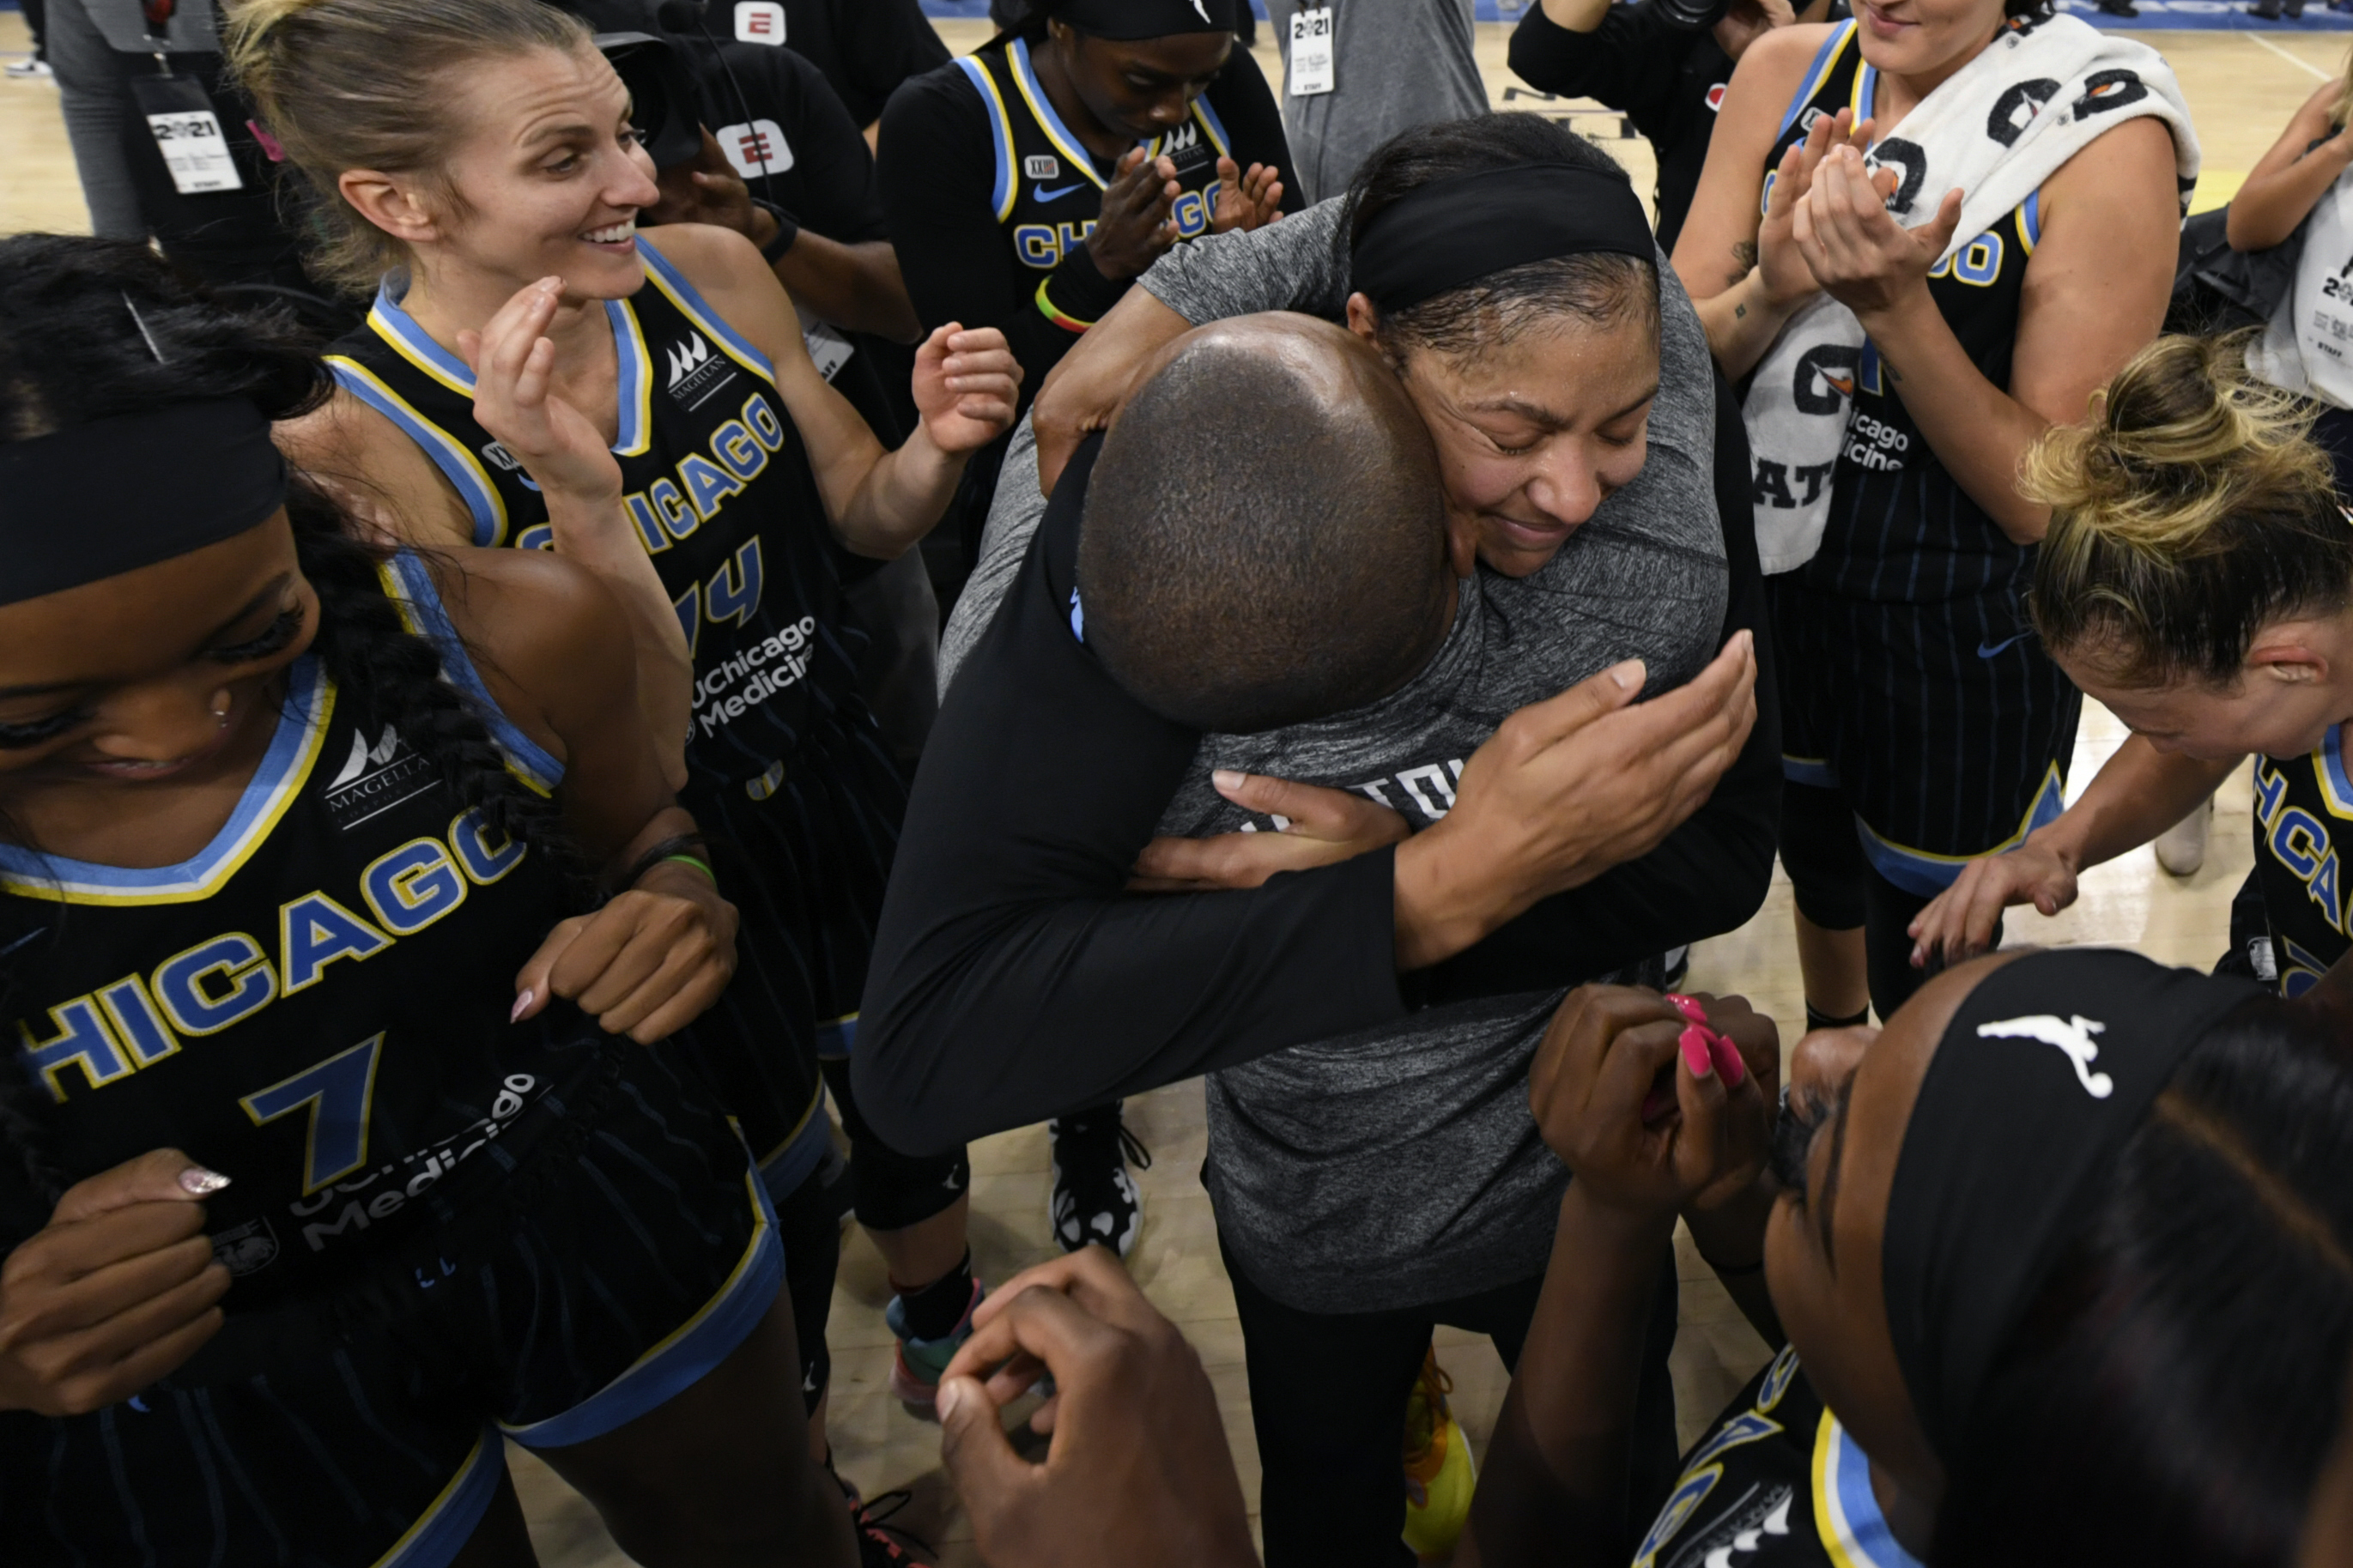 WNBA Finals 2021: Candace Parker leads hometown Chicago Sky to